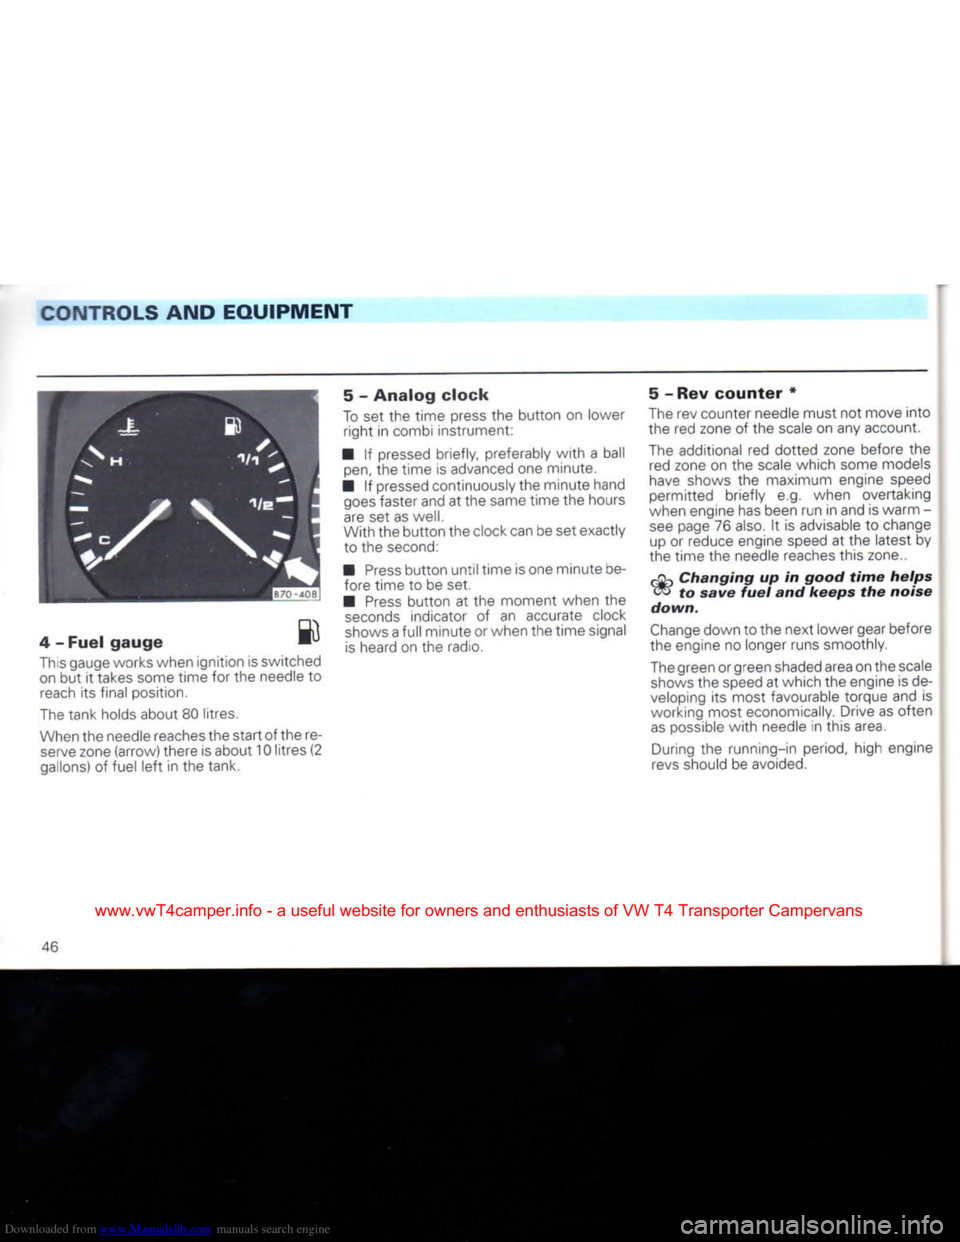 VOLKSWAGEN CARAVELLE 1992 T4 / 4.G Owners Manual Downloaded from www.Manualslib.com manuals search engine 
CONTROLS
 AND EQUIPMENT 

4
 -
 Fuel gauge
 ^u 

This gauge works
 when
 ignition
 is
 switched  on
 but it
 takes some time for
 the
 needle
